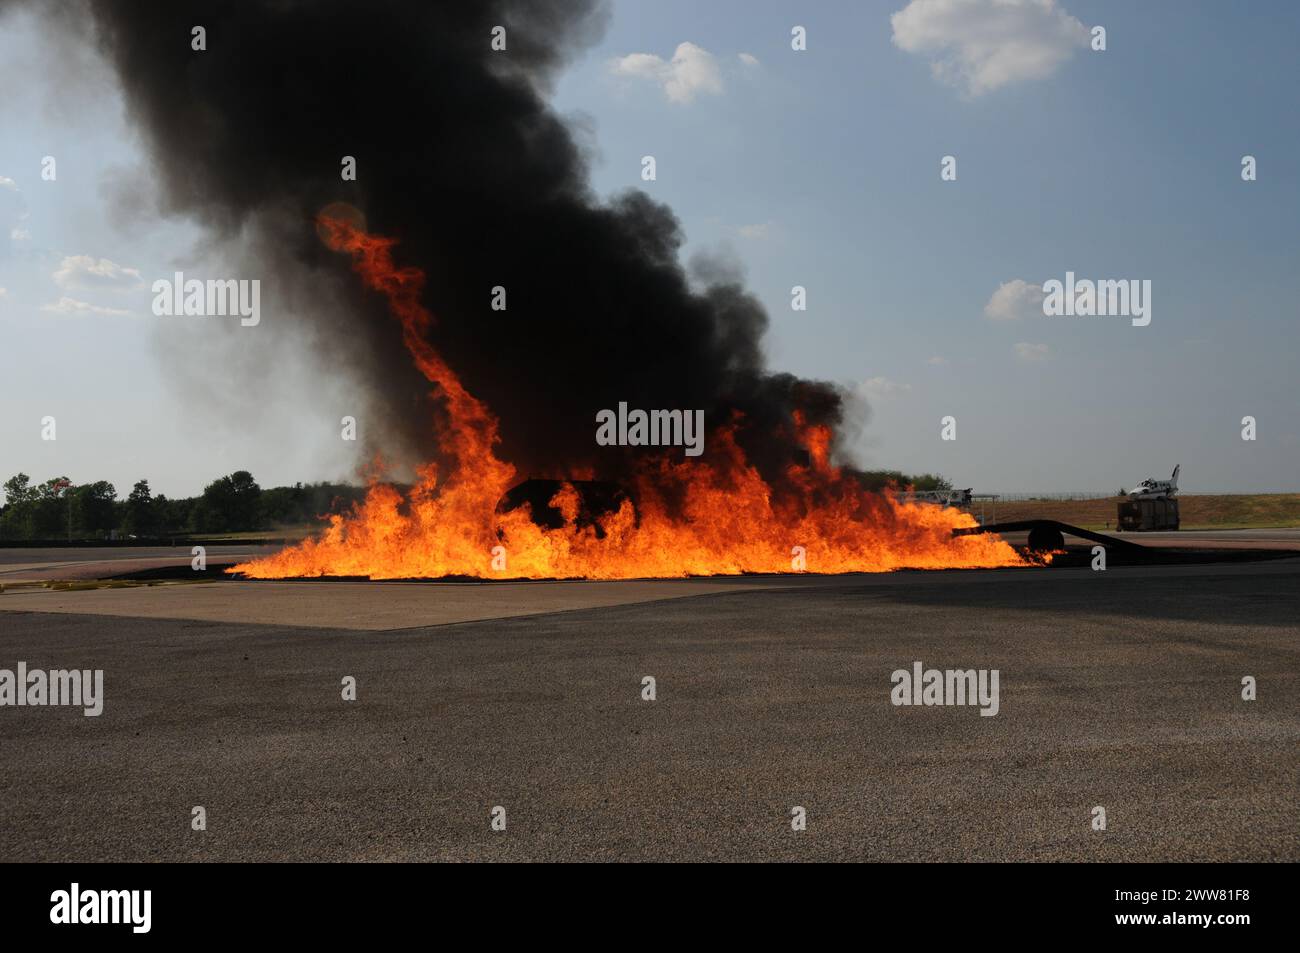 Fire Training Pit (Wide), Texas Stock Photo